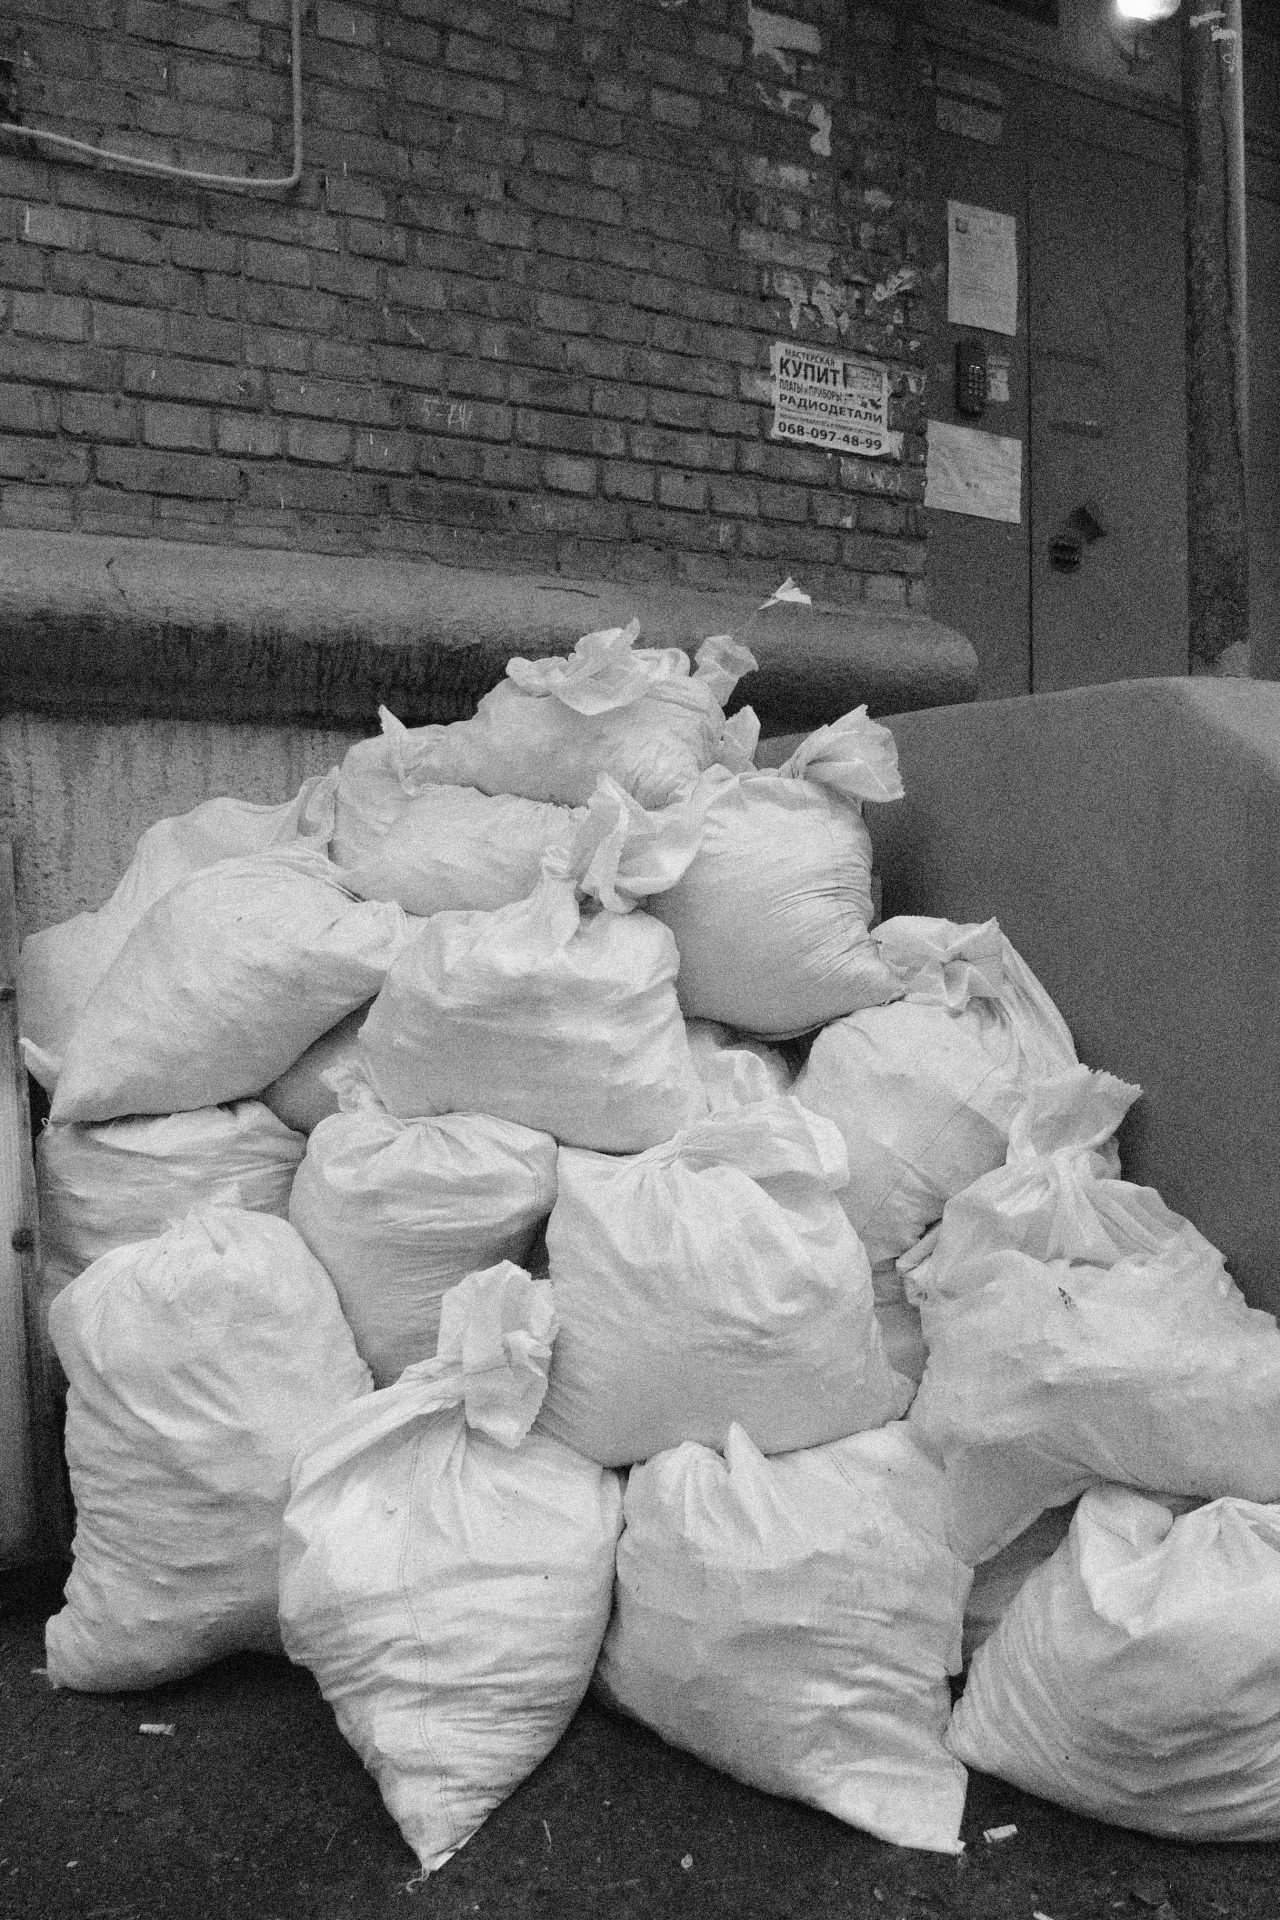 Mountain of Bags